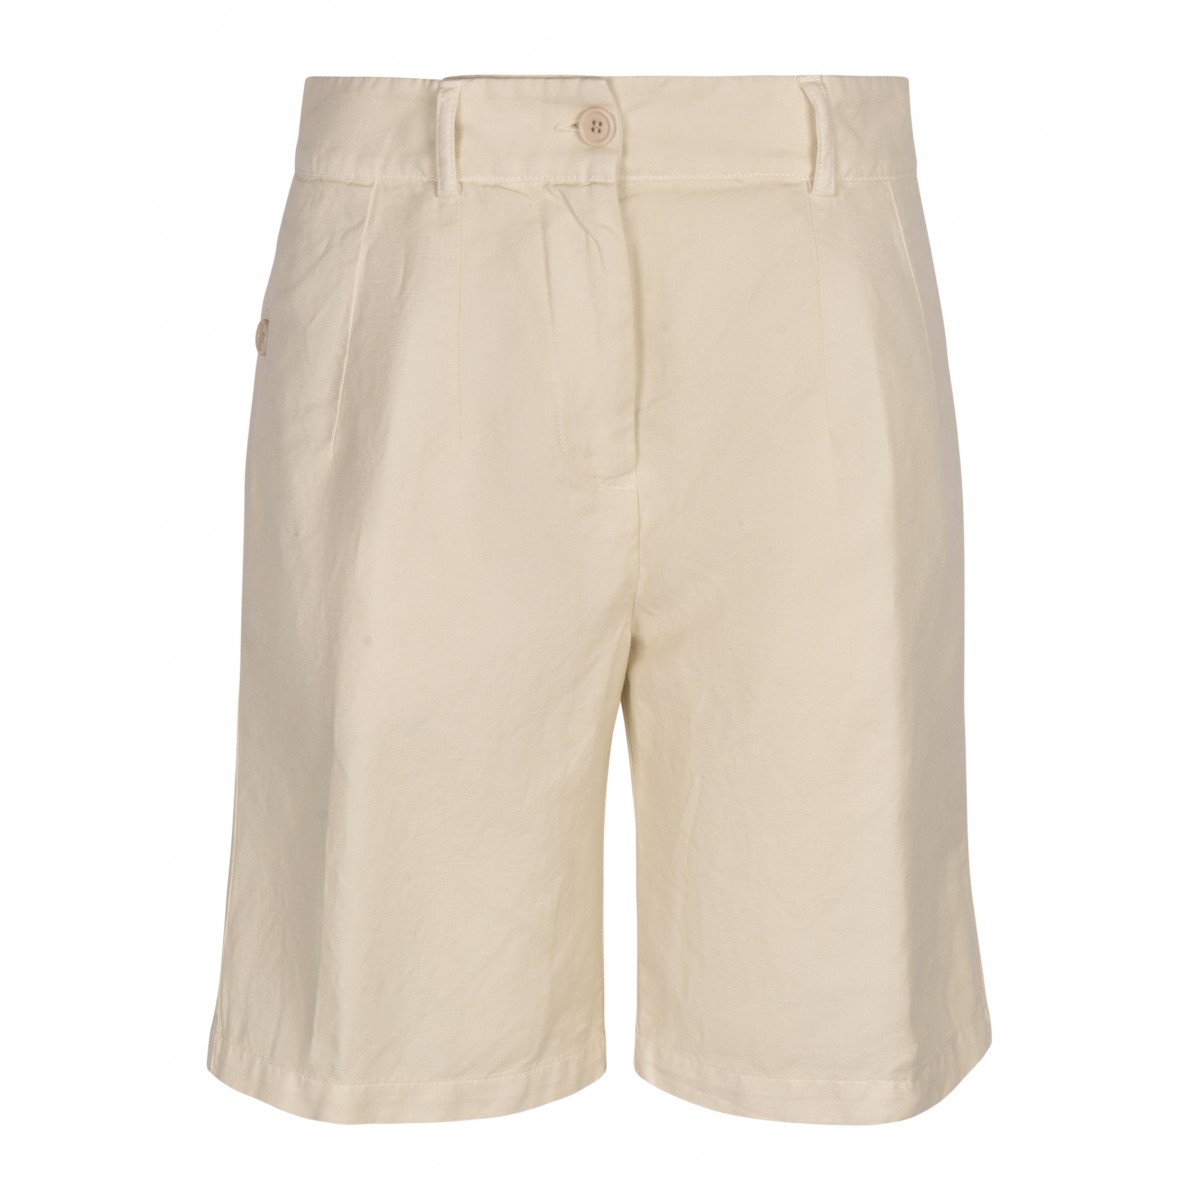 Ivory cotton and linen shorts